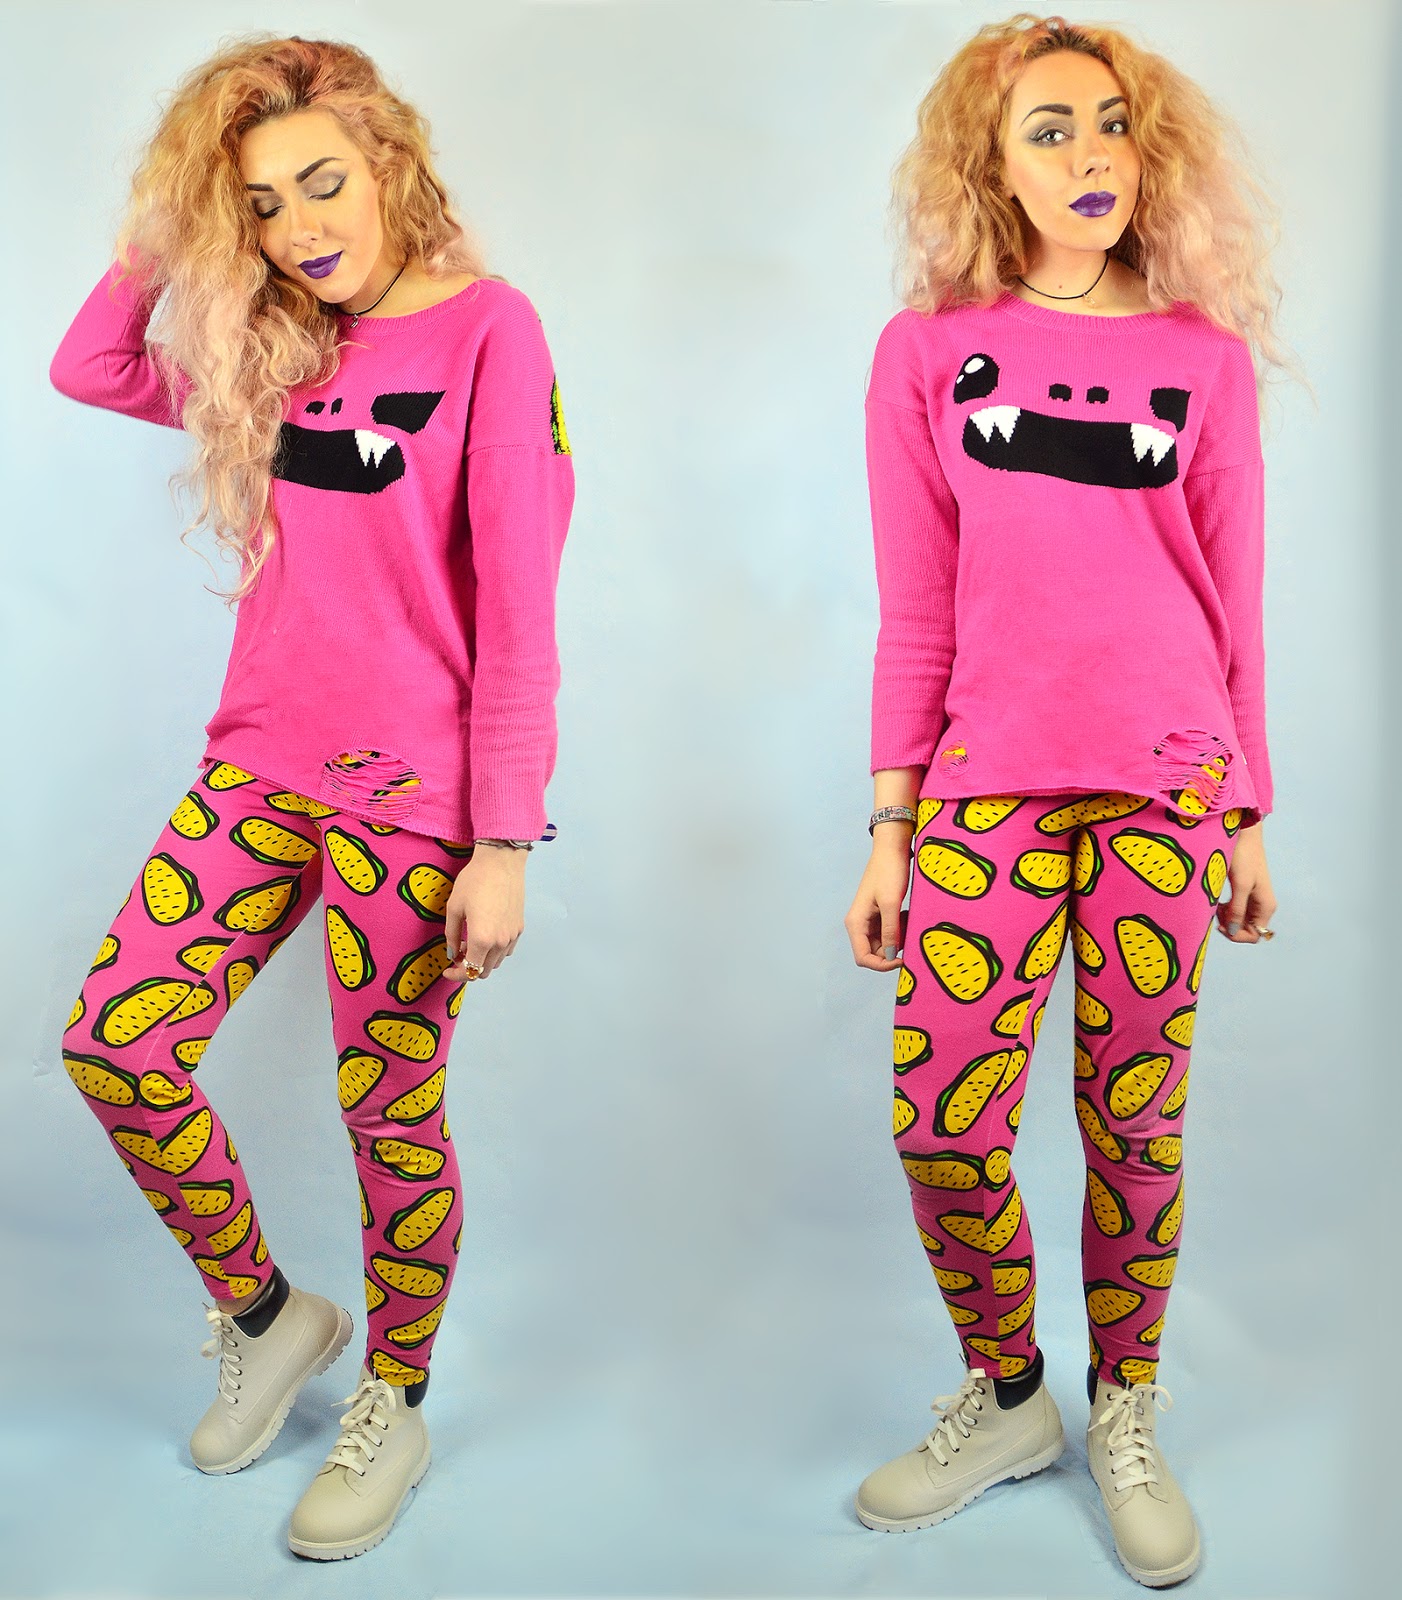 Soso Happy Pink Iron Fist Jumper, Taco Leggings, Sole Wish Timberland Boots